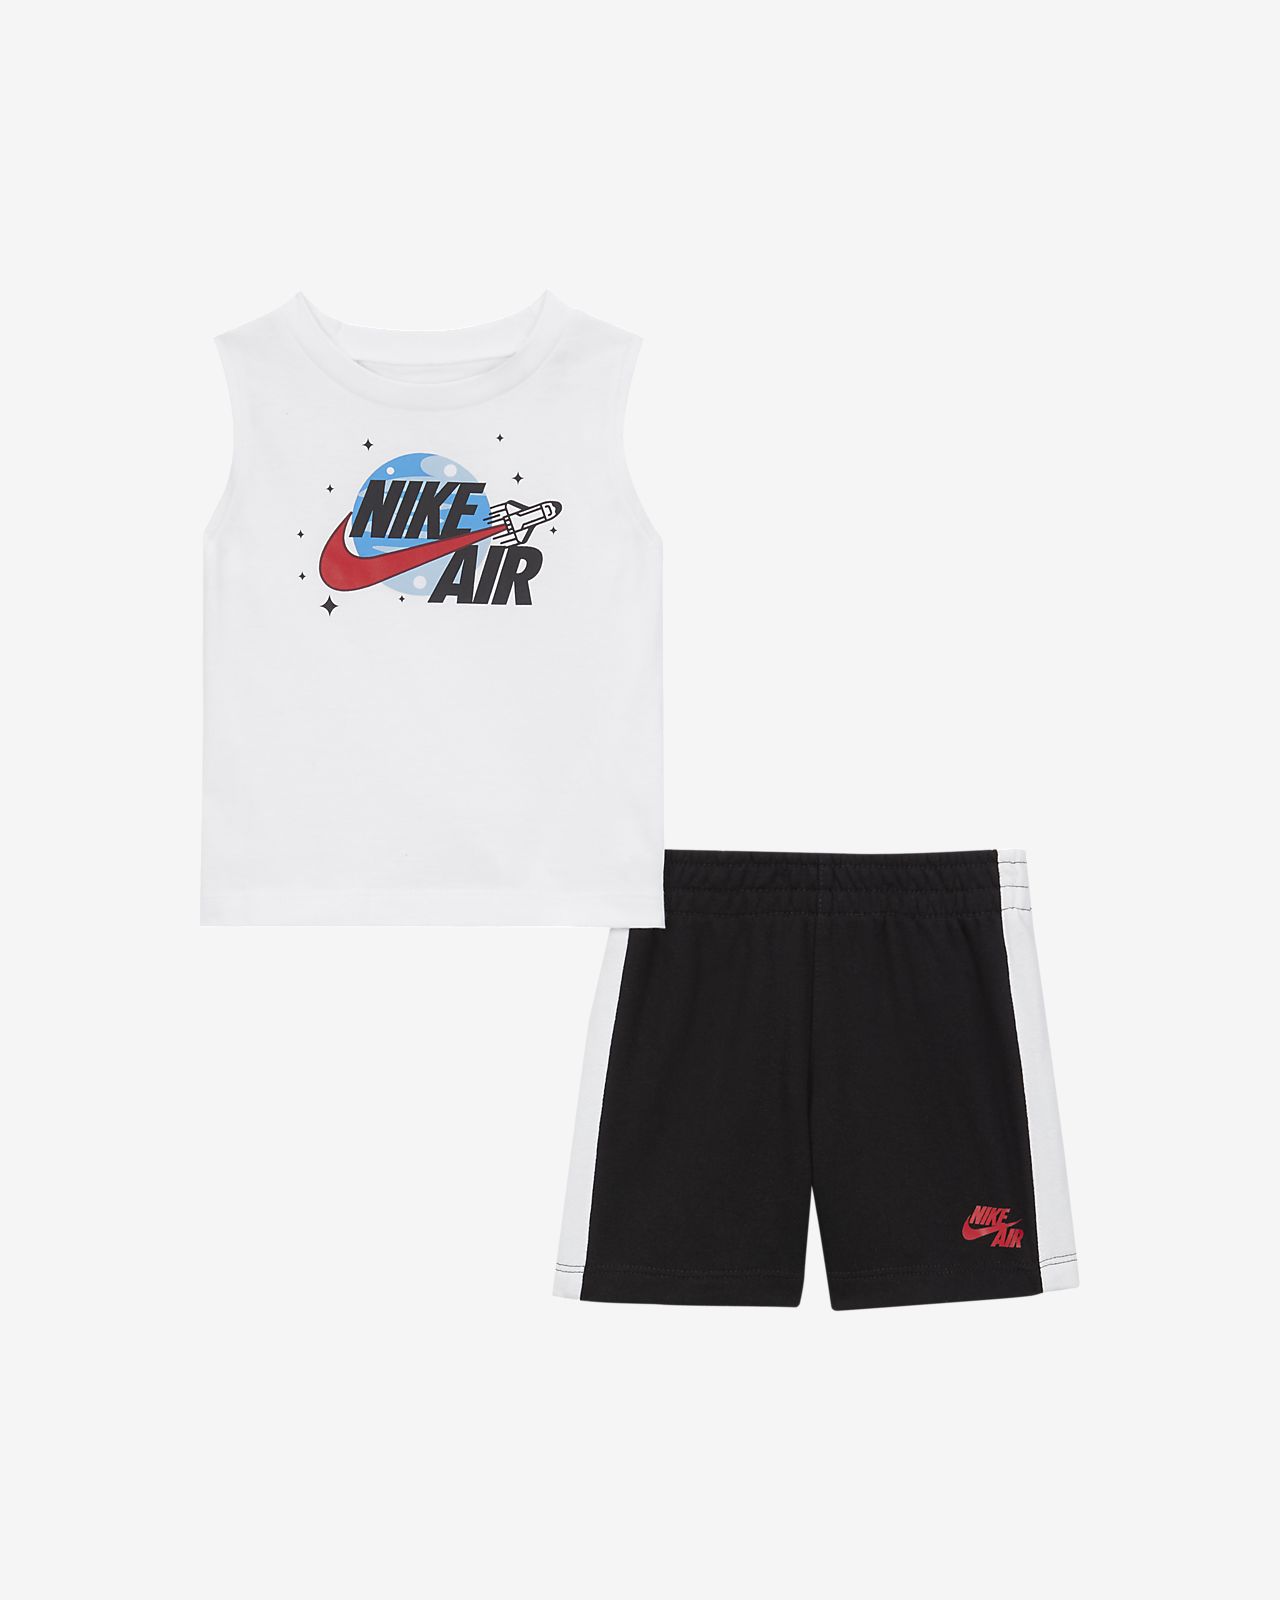 nike shorts and top